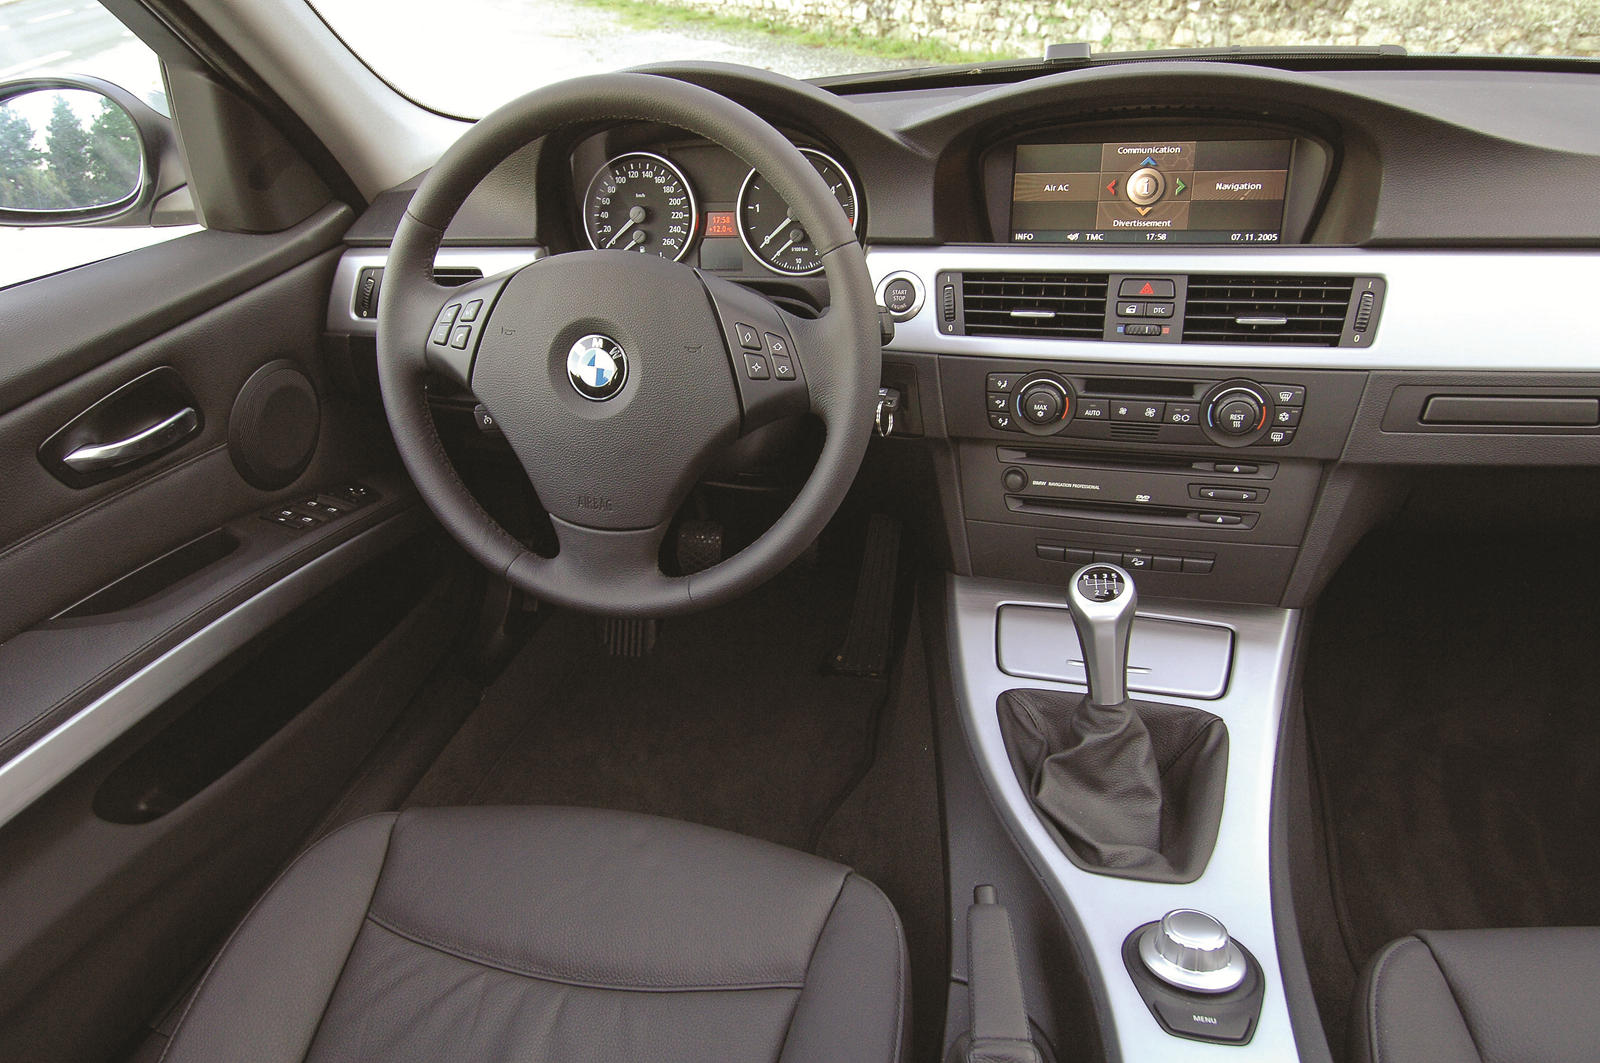 BMW 5 Series E60 Diesel Used Car Review